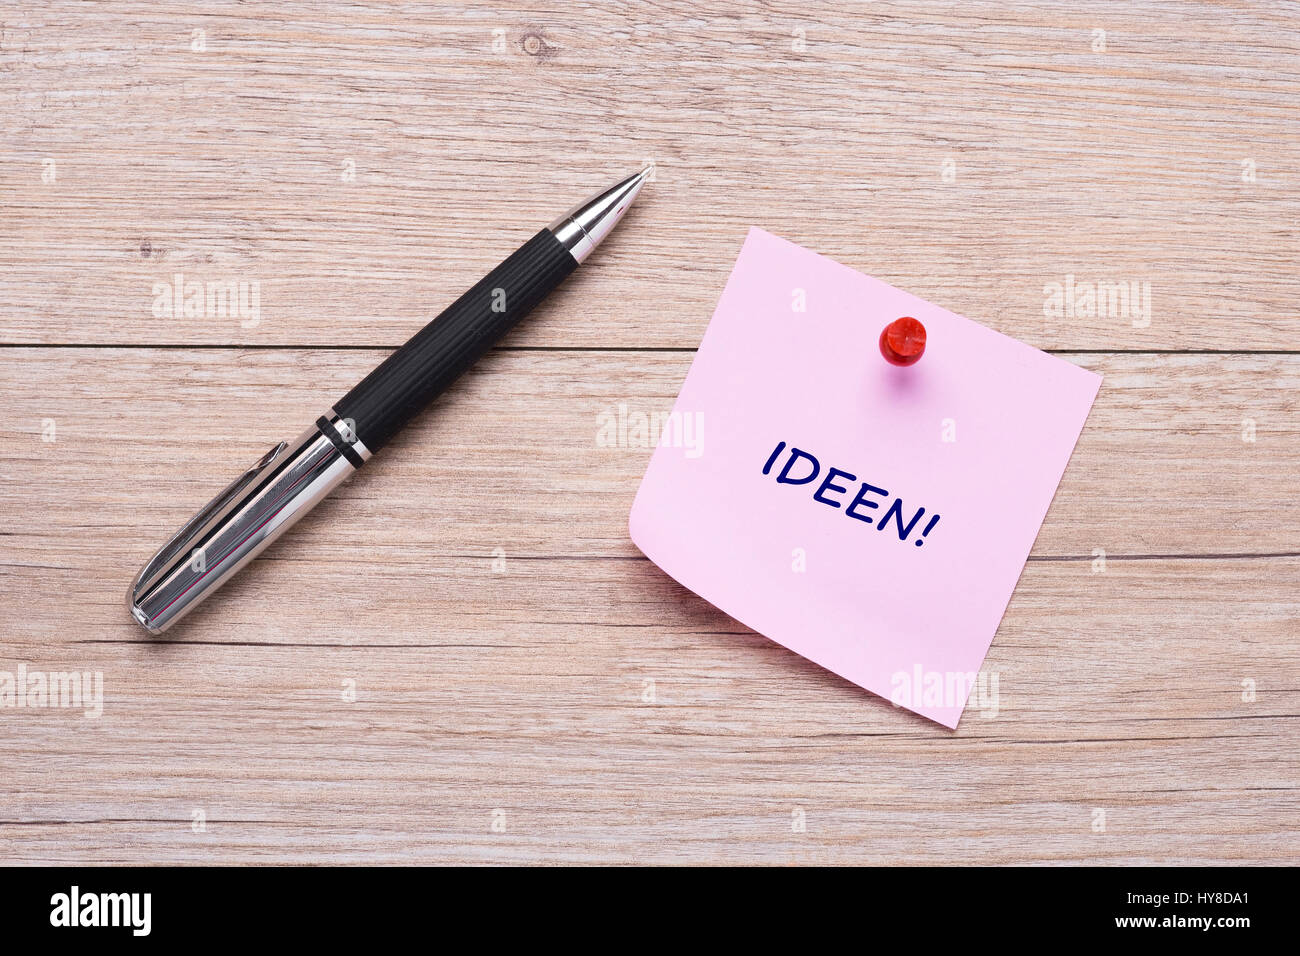 German word 'Ideen' on pink sticky note with pen on wood Stock Photo